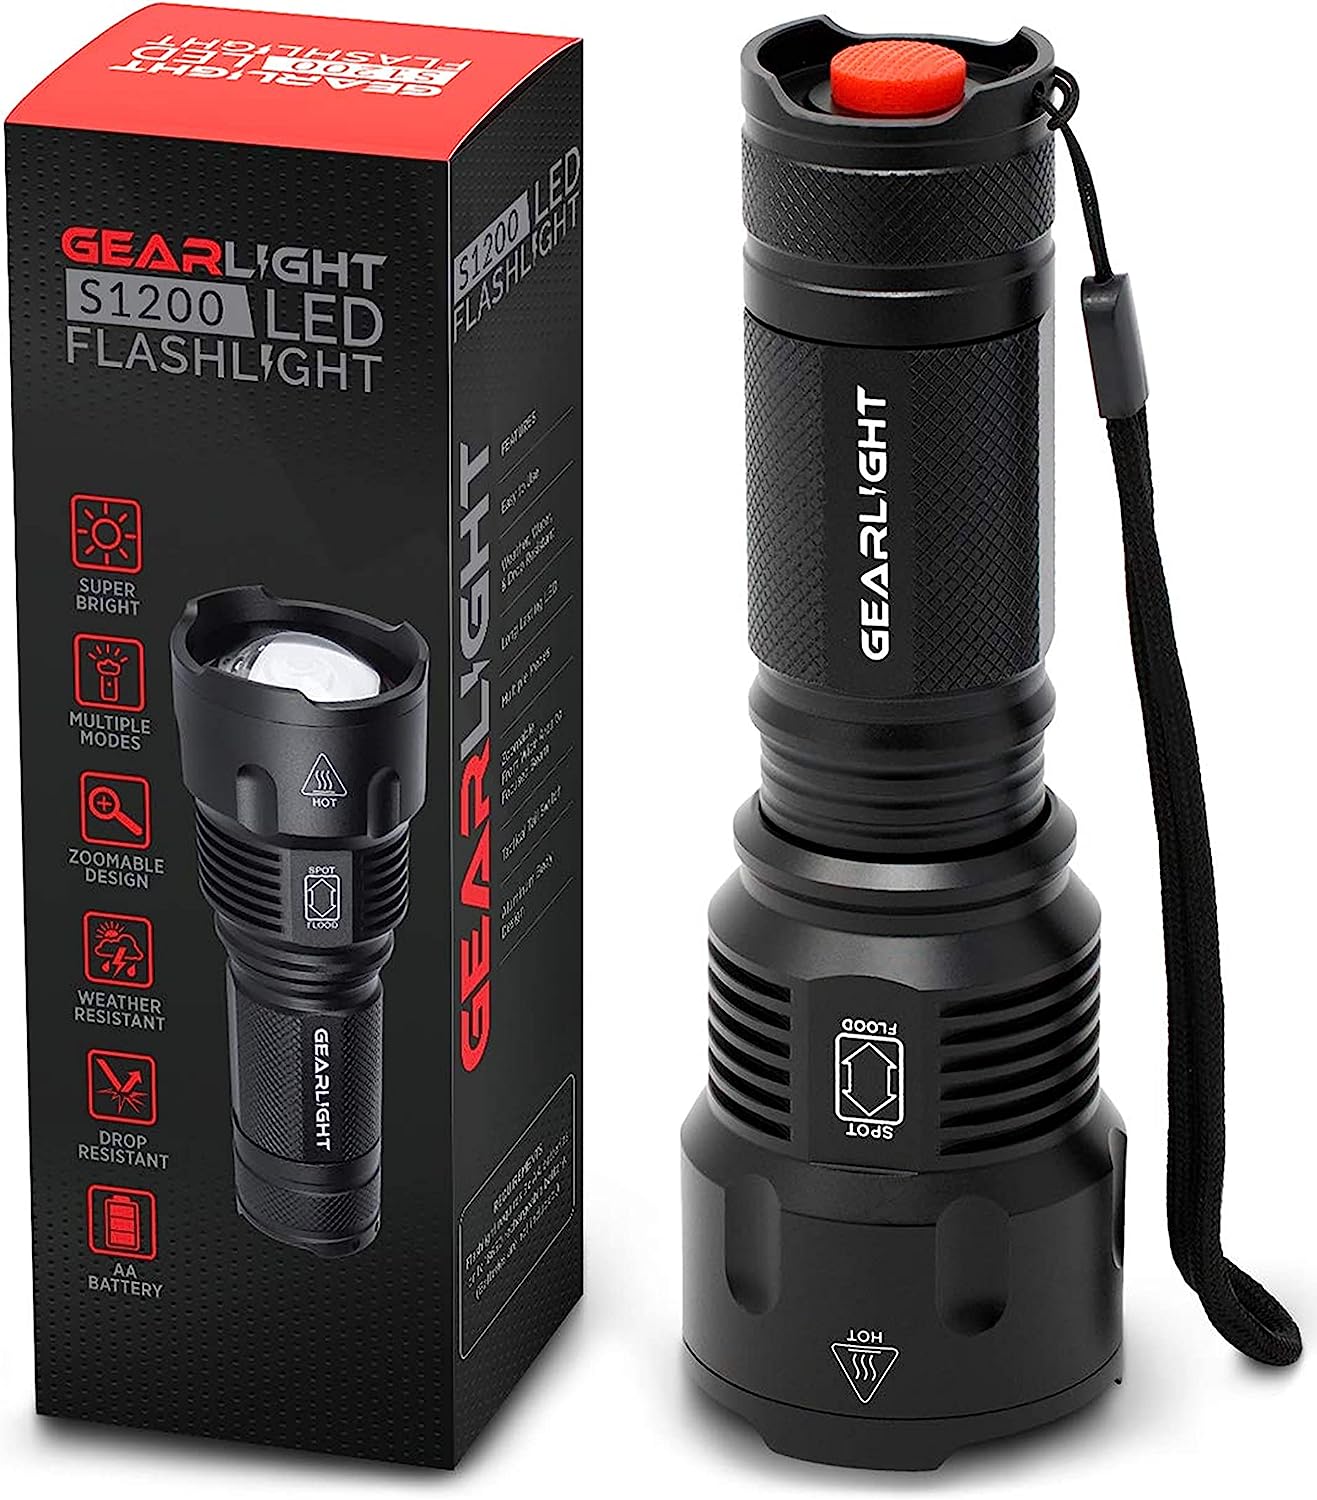 GearLight High-Powered LED Flashlight S1200 - Mid Size, Zoomable, Water Resistant, Handheld Light - High Lumen Camping, Outdoor, Emergency Flashlights - image 1 of 6